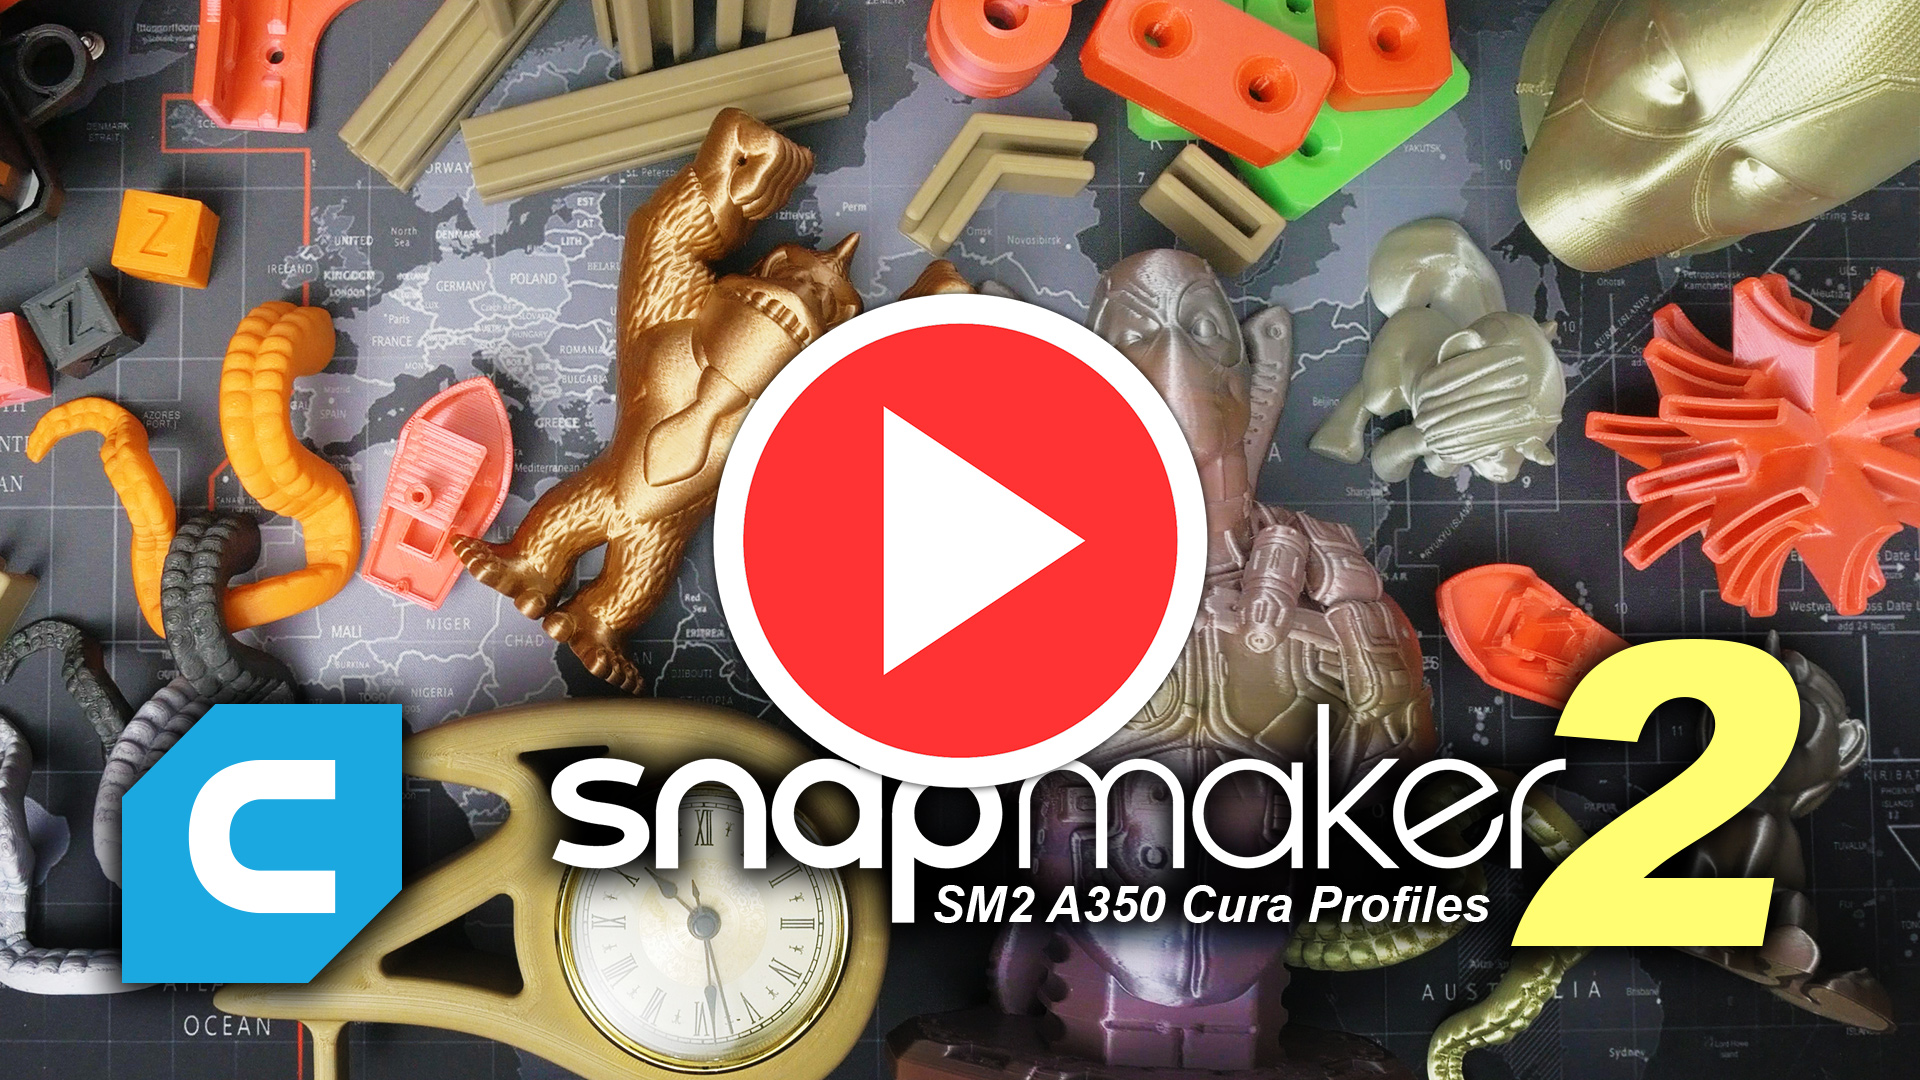 Watch the Snapmaker 2.0 A350 Cura video on YouTube